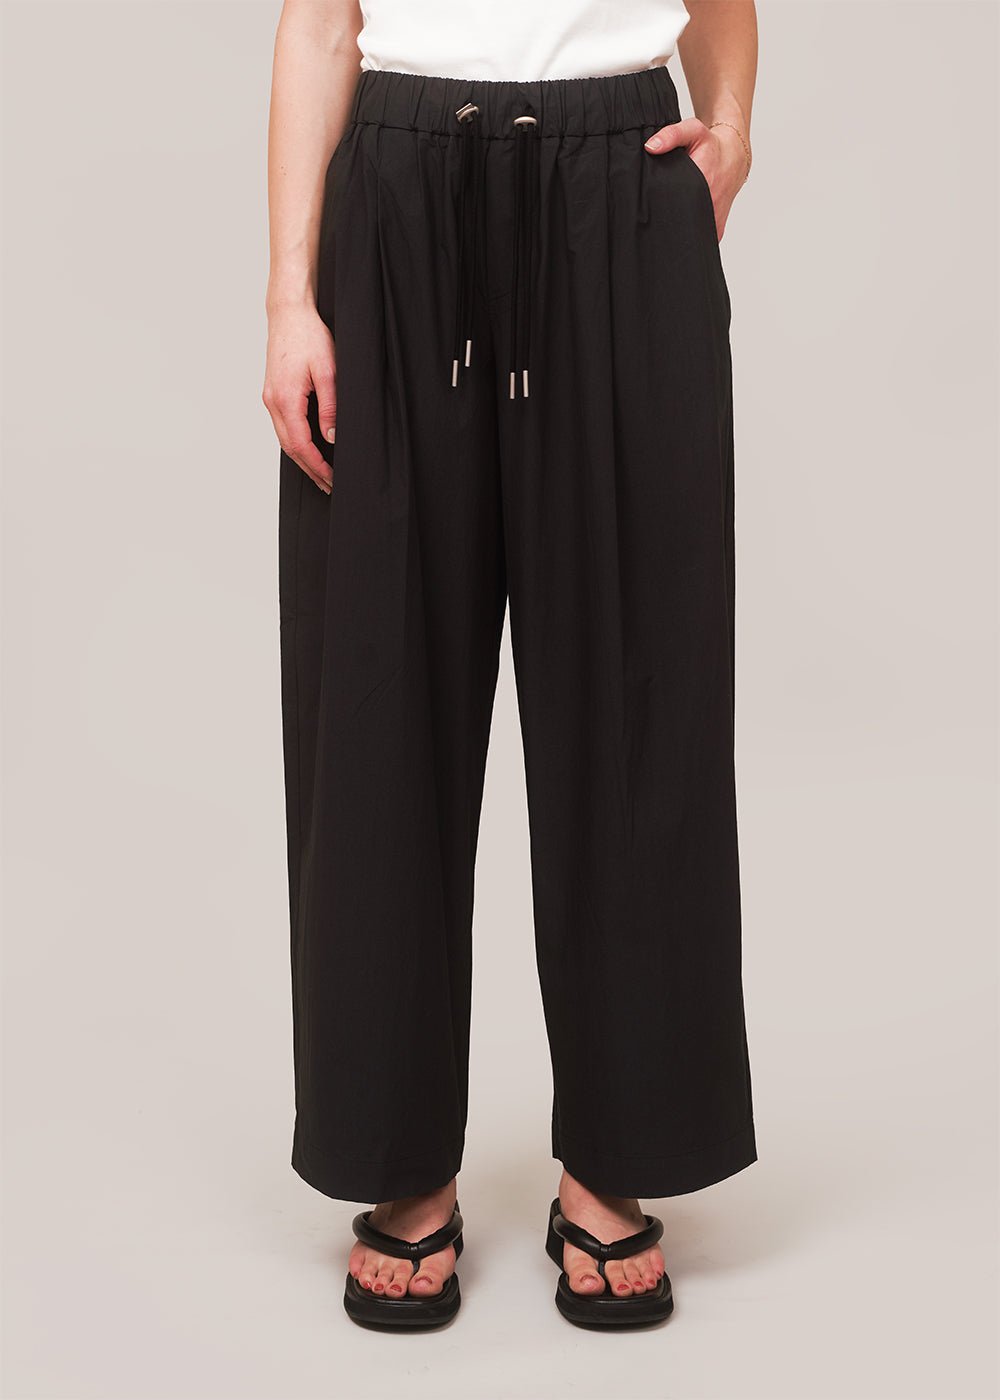 St. Agni Black Drawstring Relaxed Pants - New Classics Studios Sustainable Ethical Fashion Canada